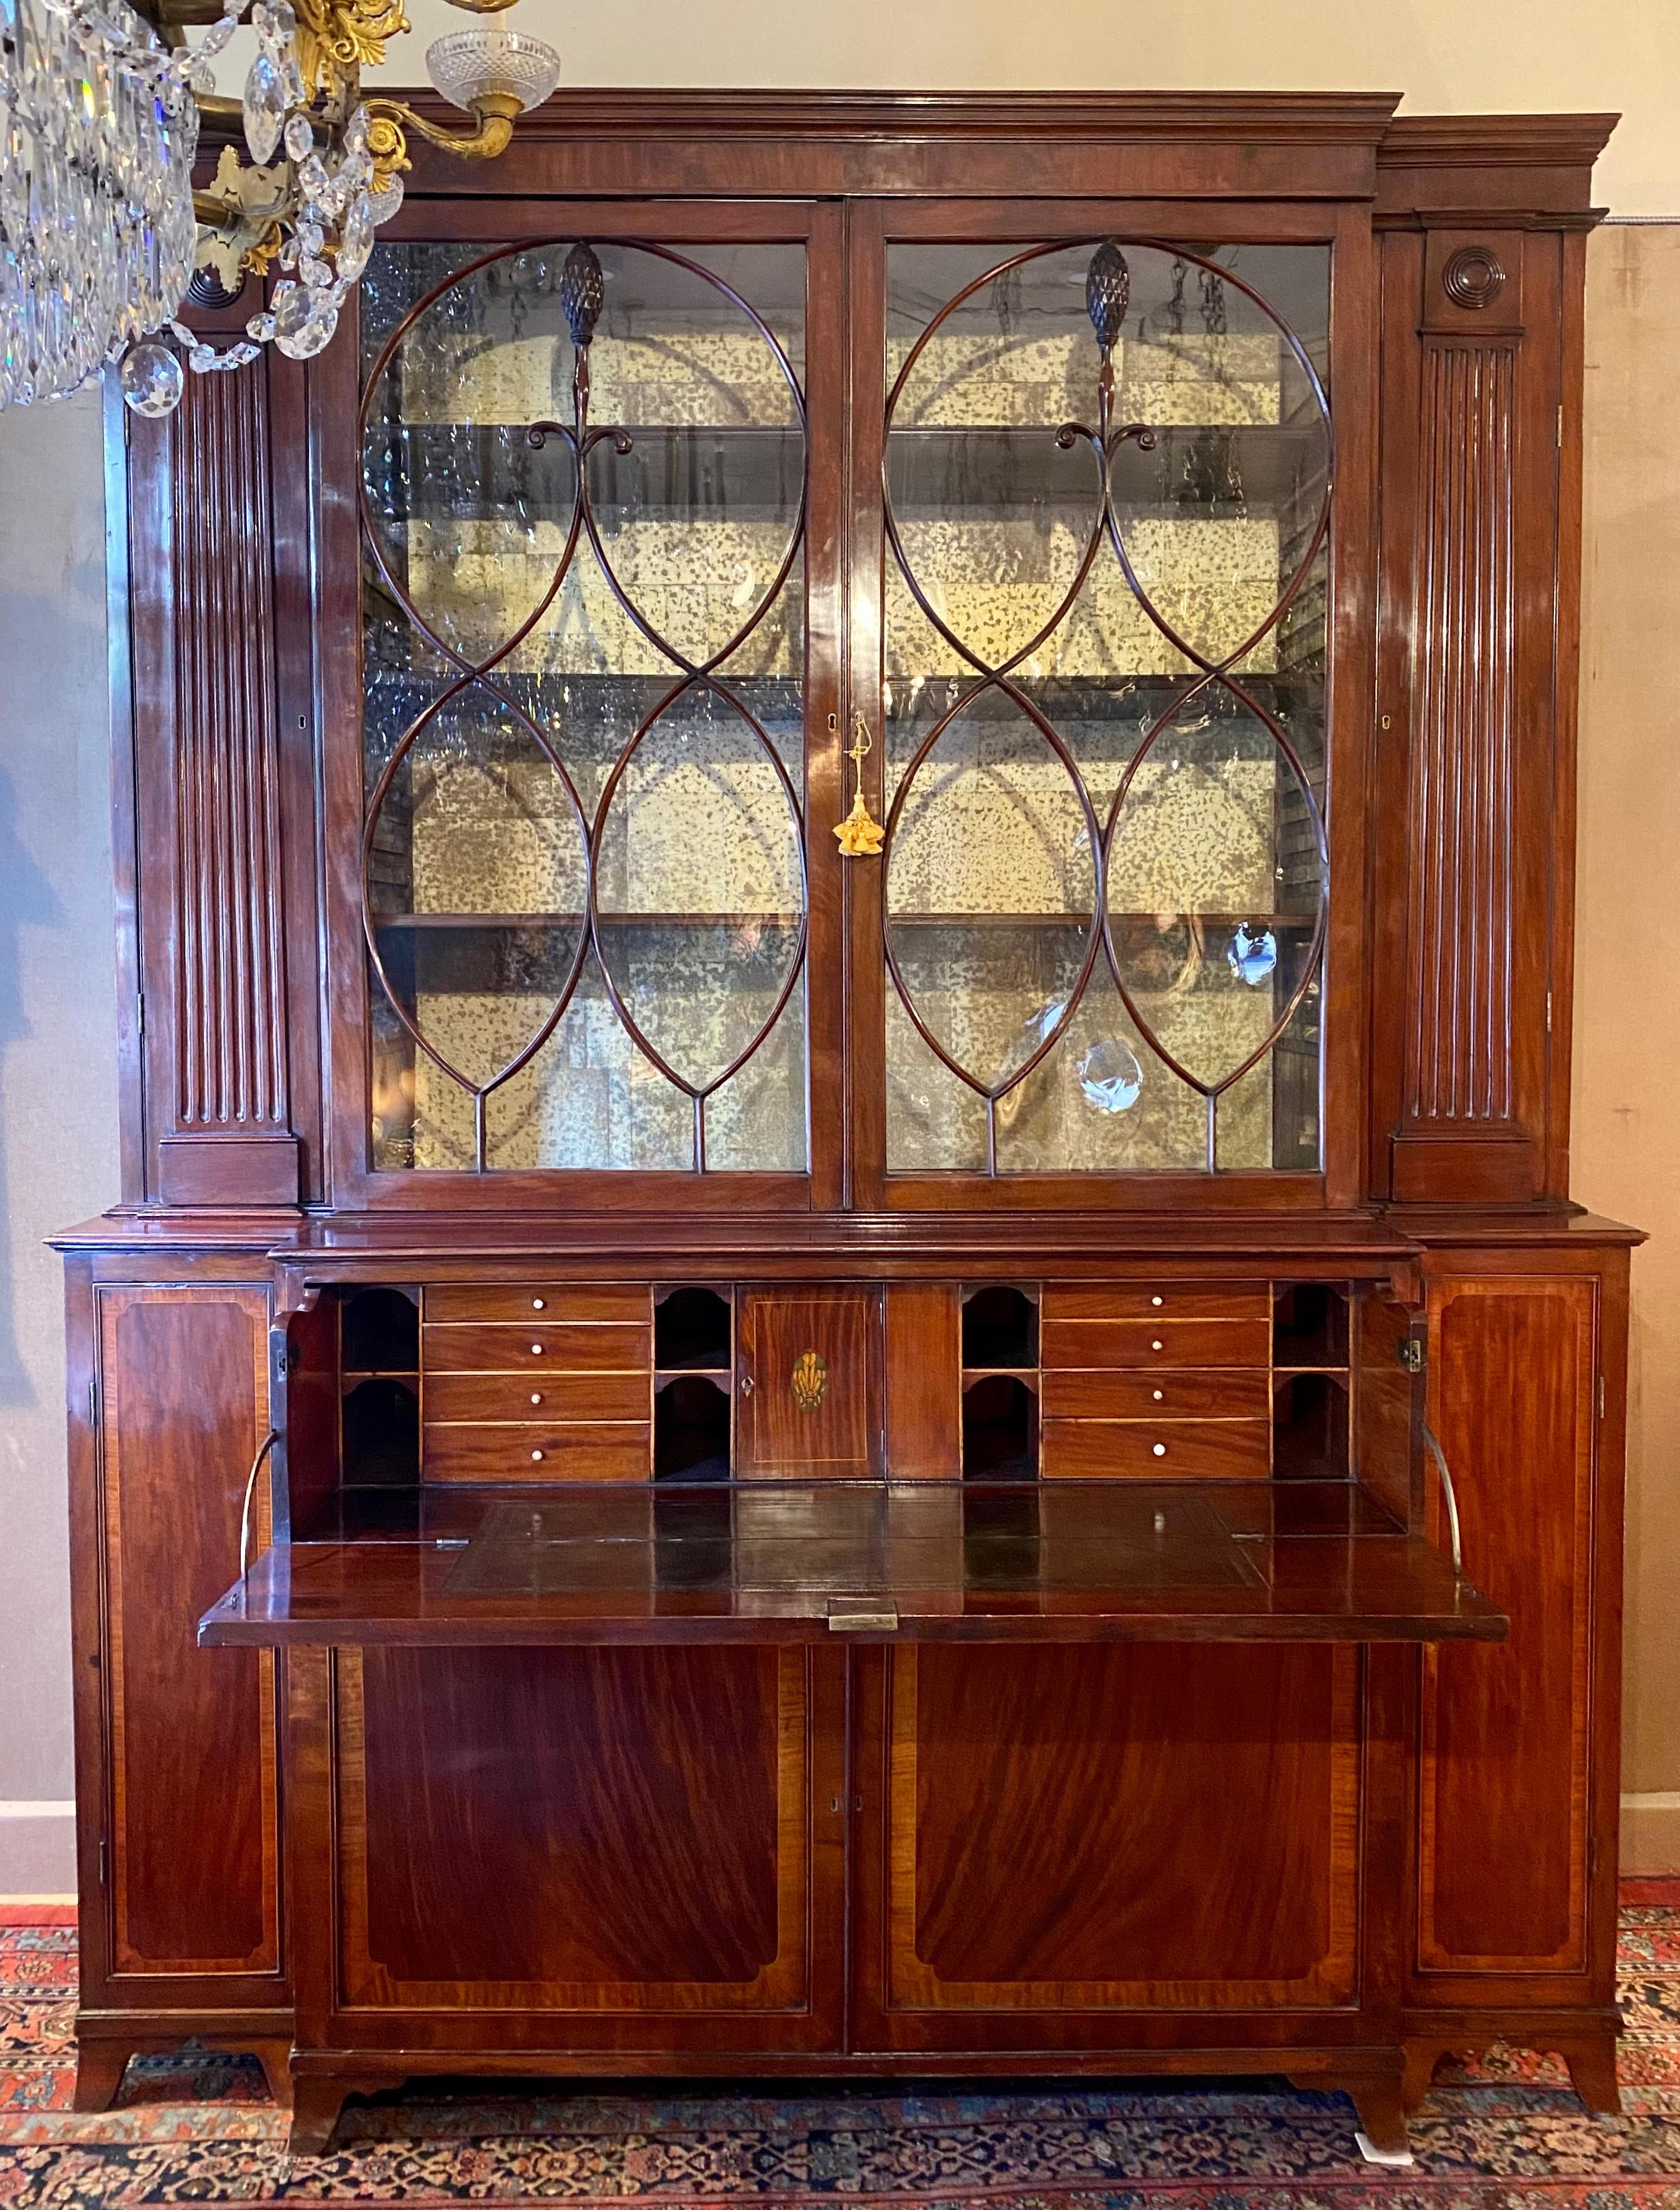 Antique Early 19th Century English Georgian Mahogany with Inlay Secretary Breakfront, Circa 1840.
Secretary has a fitted interior, and shelving space above has a lighted interior.